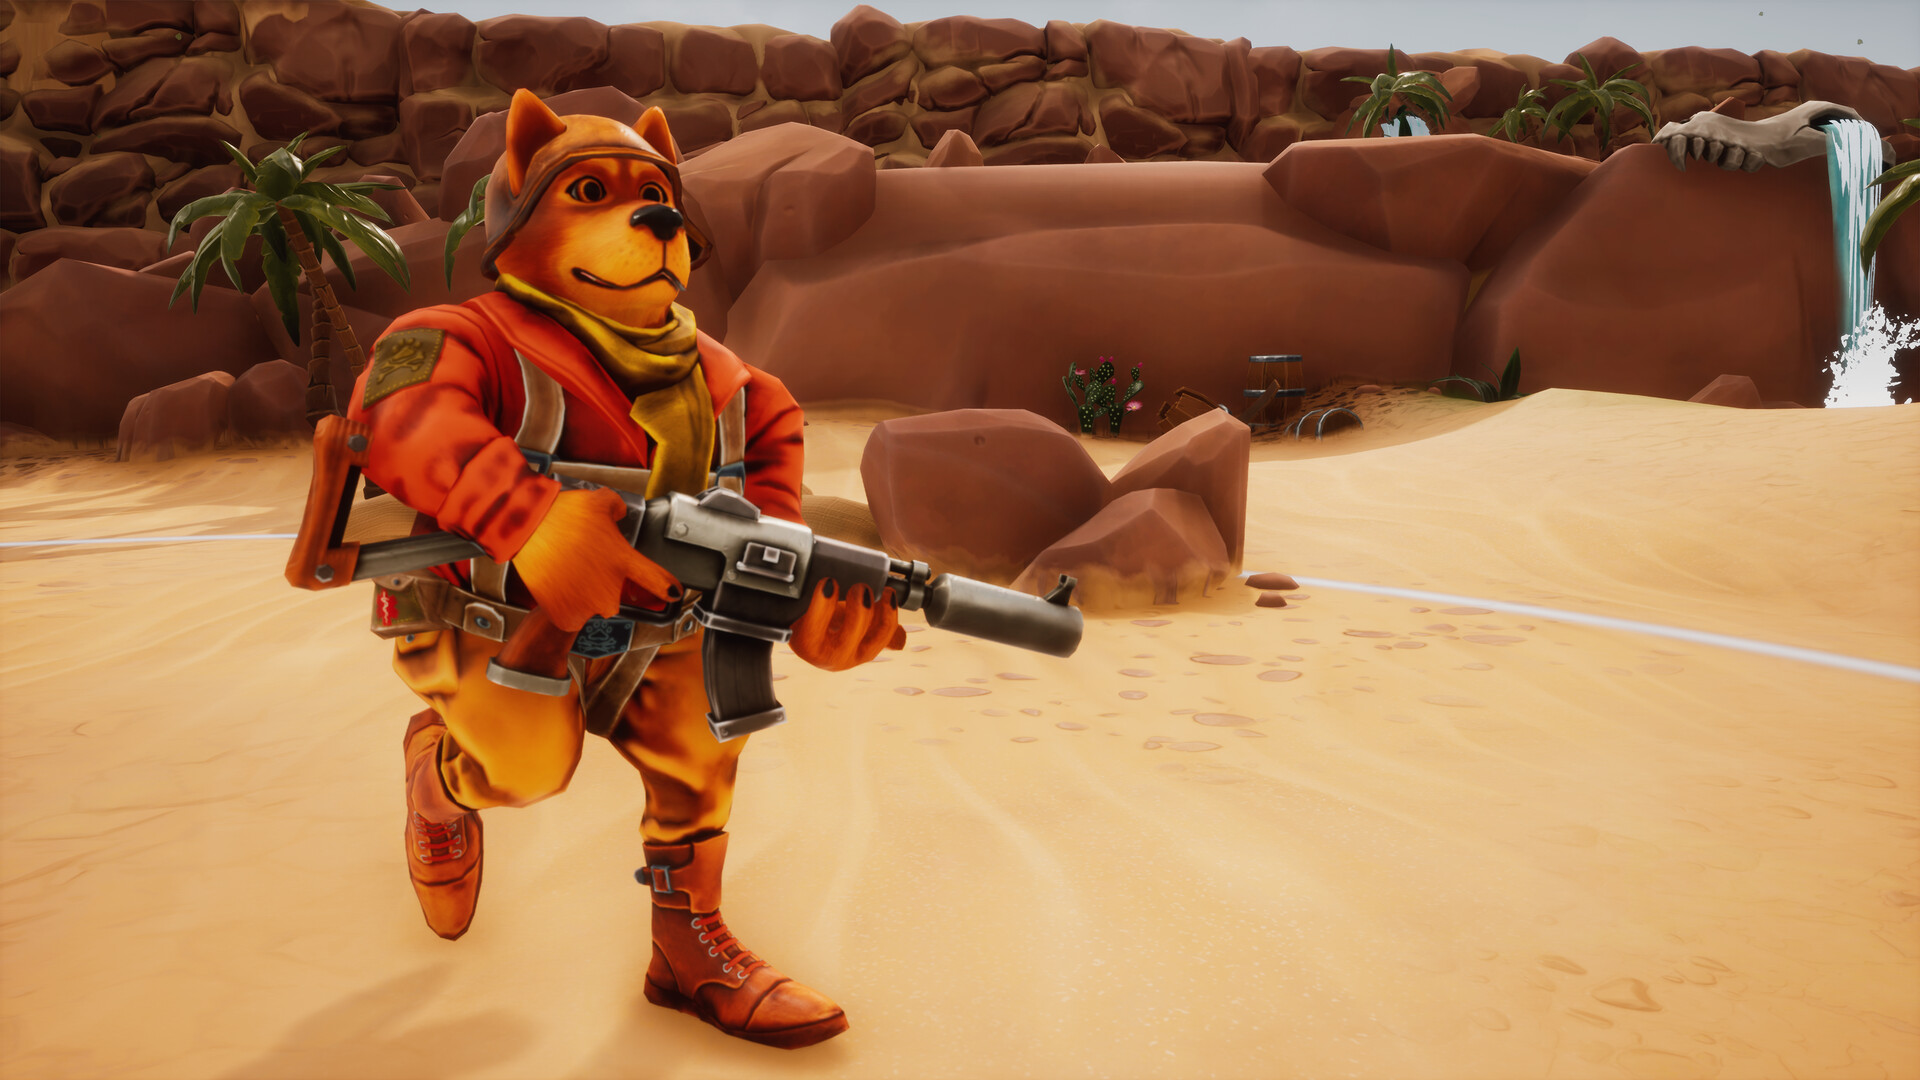 Anthropomorphic dog in red military uniform holding assault rifle with sandy dunes and rocky cliff face in background.